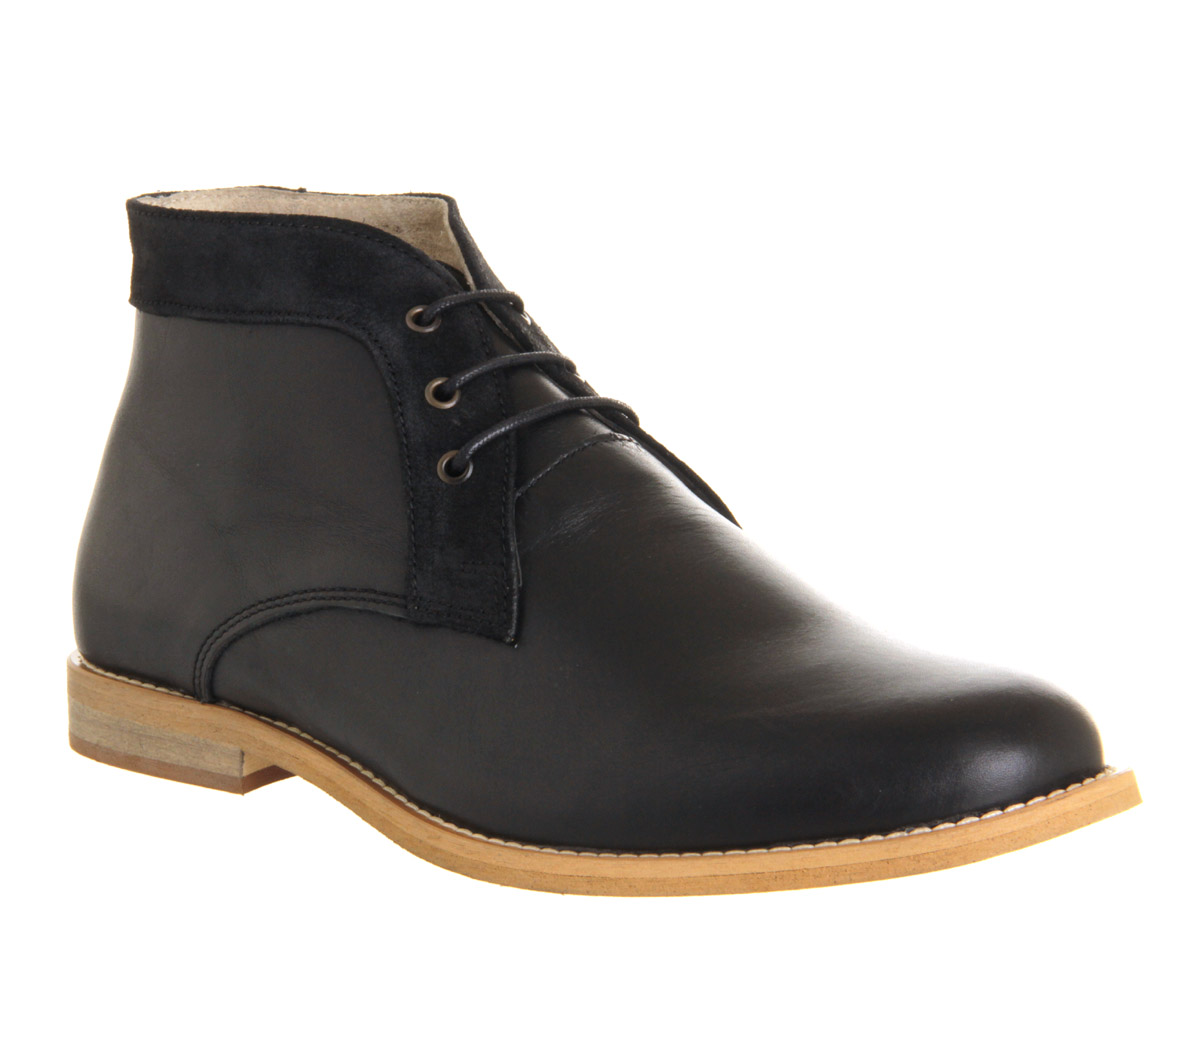 Ask the MissusApple Chukka bootsBlack Leather Suede